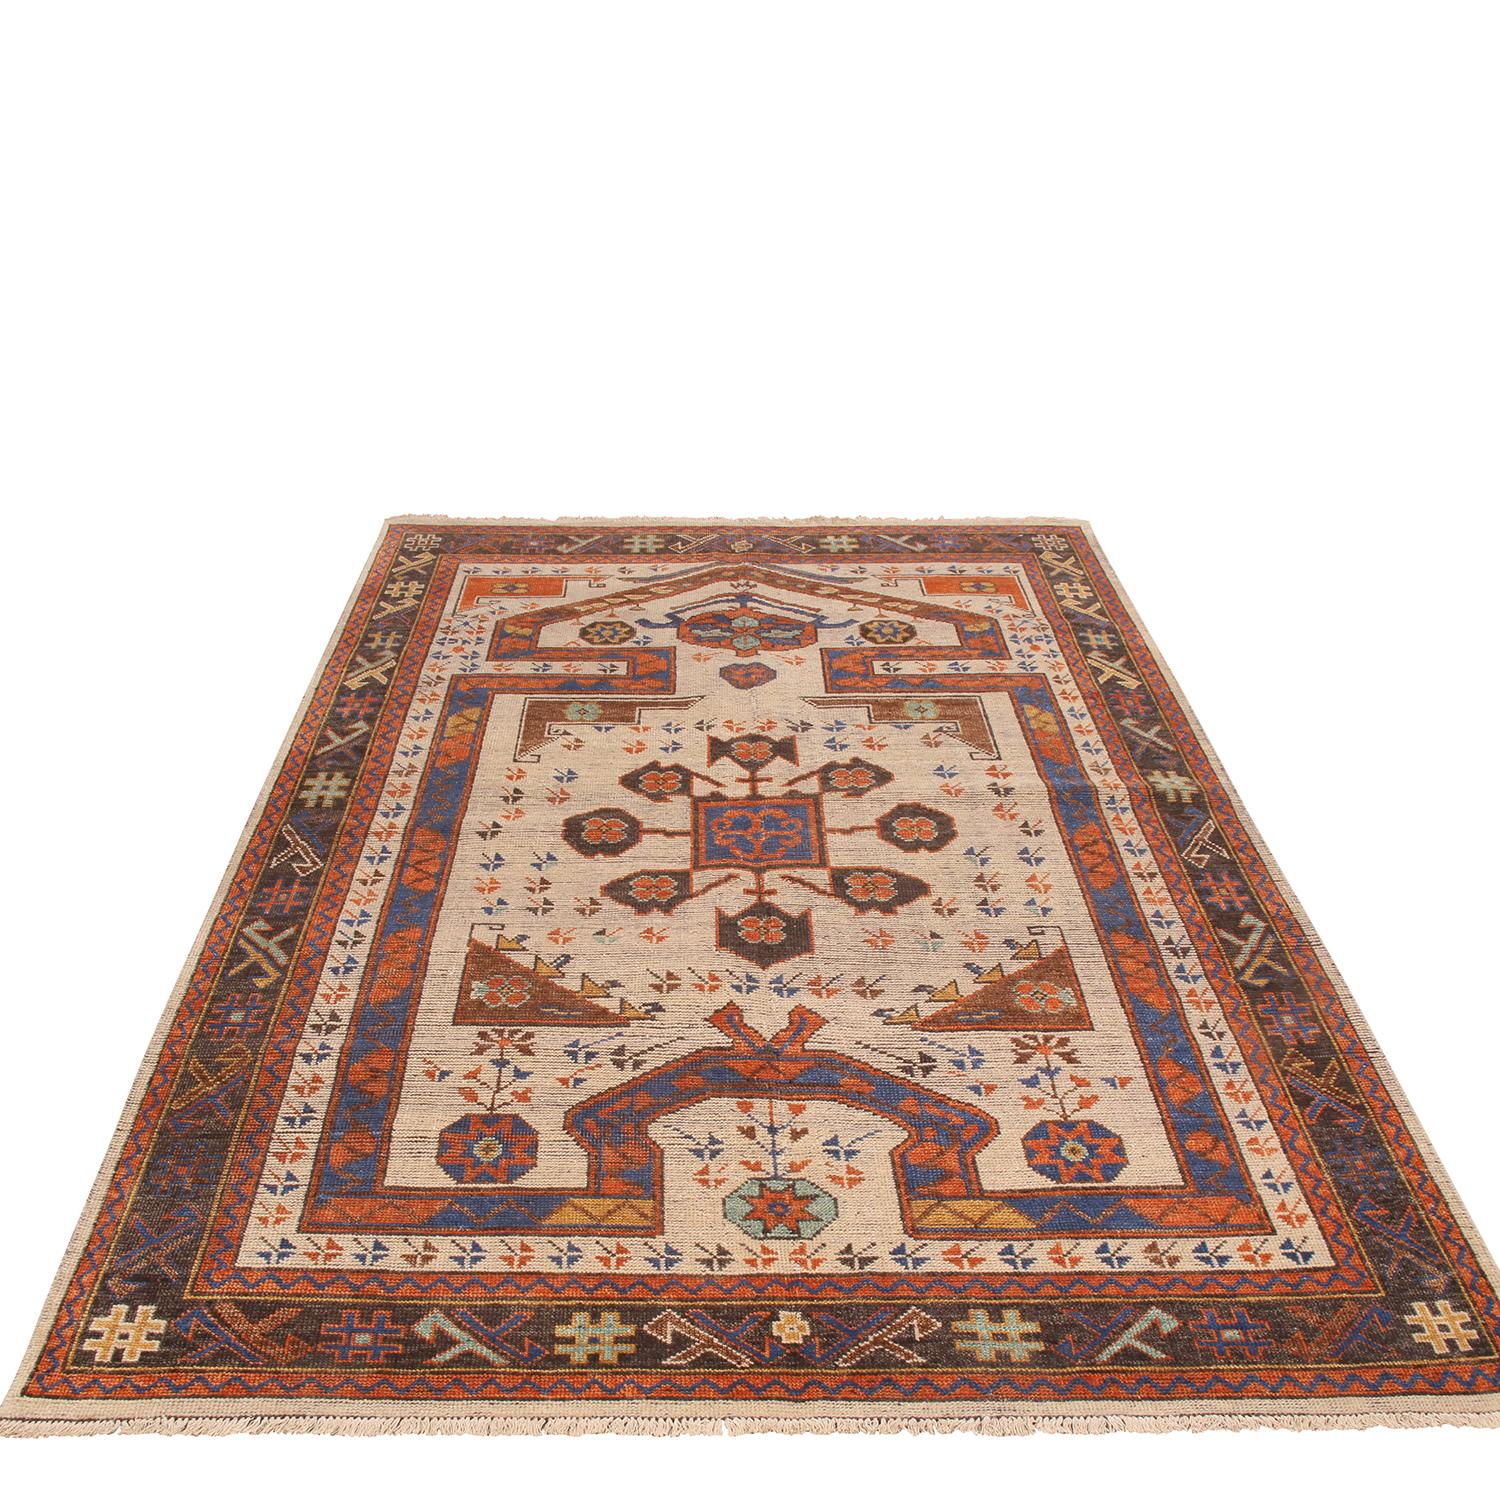 Hand knotted in India, this wool prayer rug is part of Rug & Kilim’s premier Burano collection, embracing an iconic Traditional Design with revitalized tangerine and burgundy red, beige, and blue colorways complementing the very fluid intricacies of